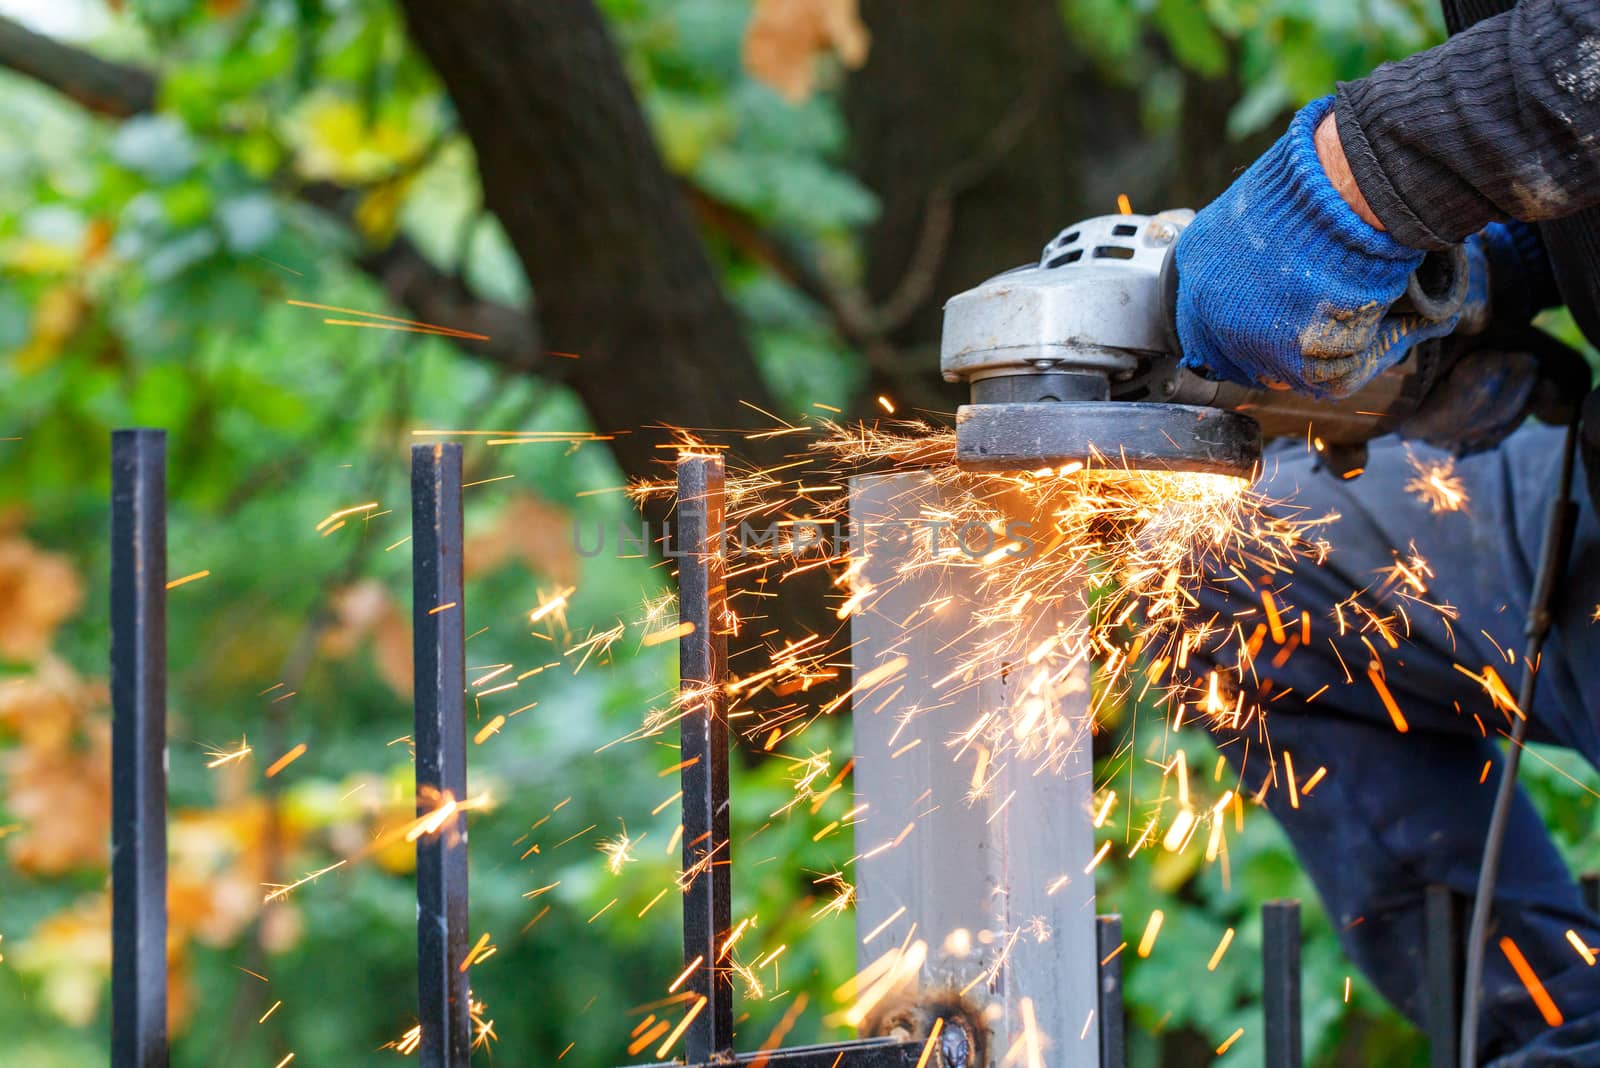 Bright, hot sparks fly out from under the protective cover of the angle grinder when cutting metal. by Sergii